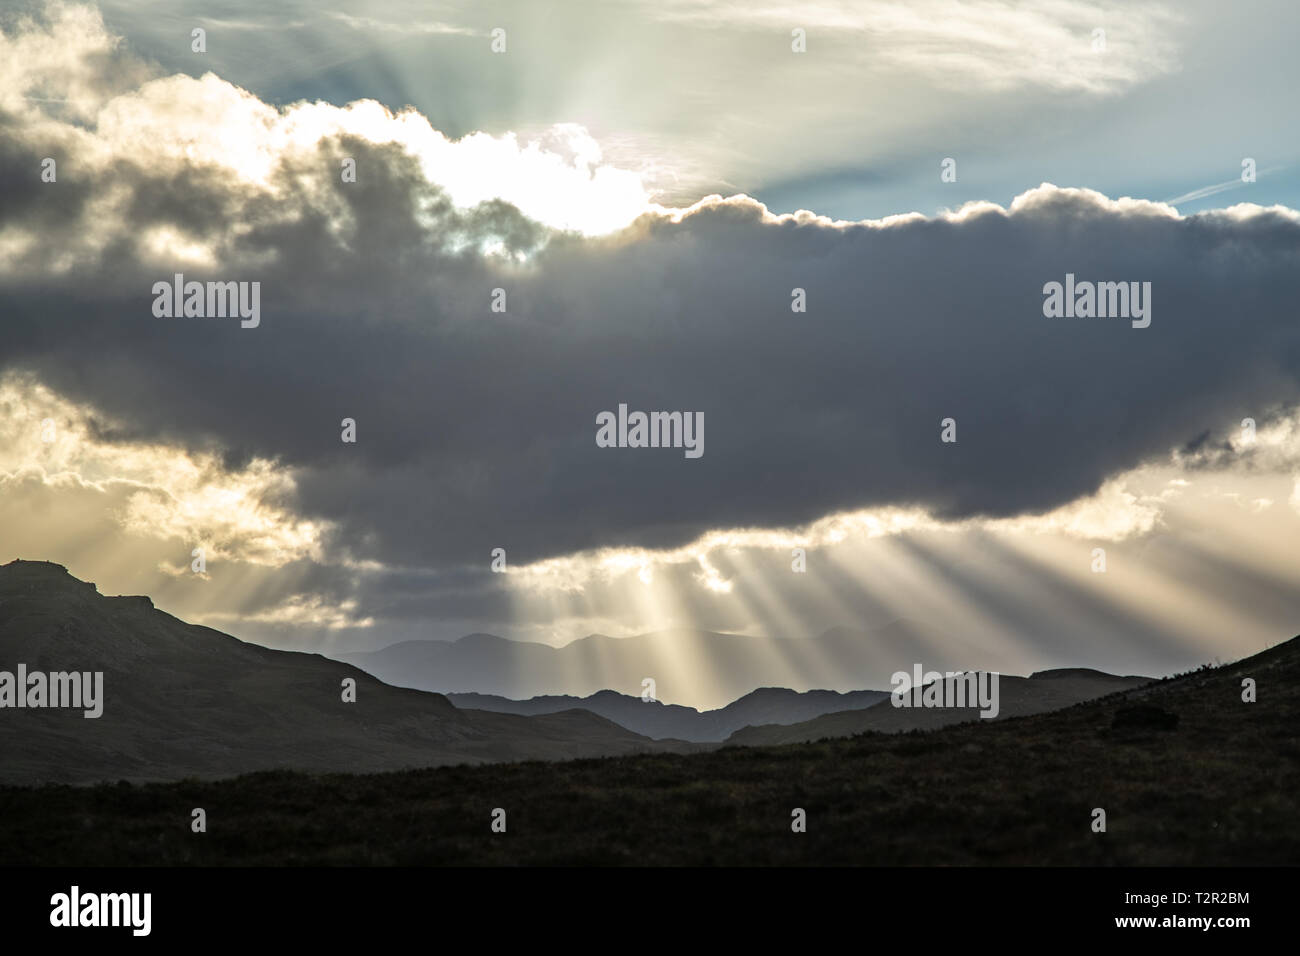 A beautiful landscape image of land around Loch Ness in Scotland, United Kingdoms Stock Photo